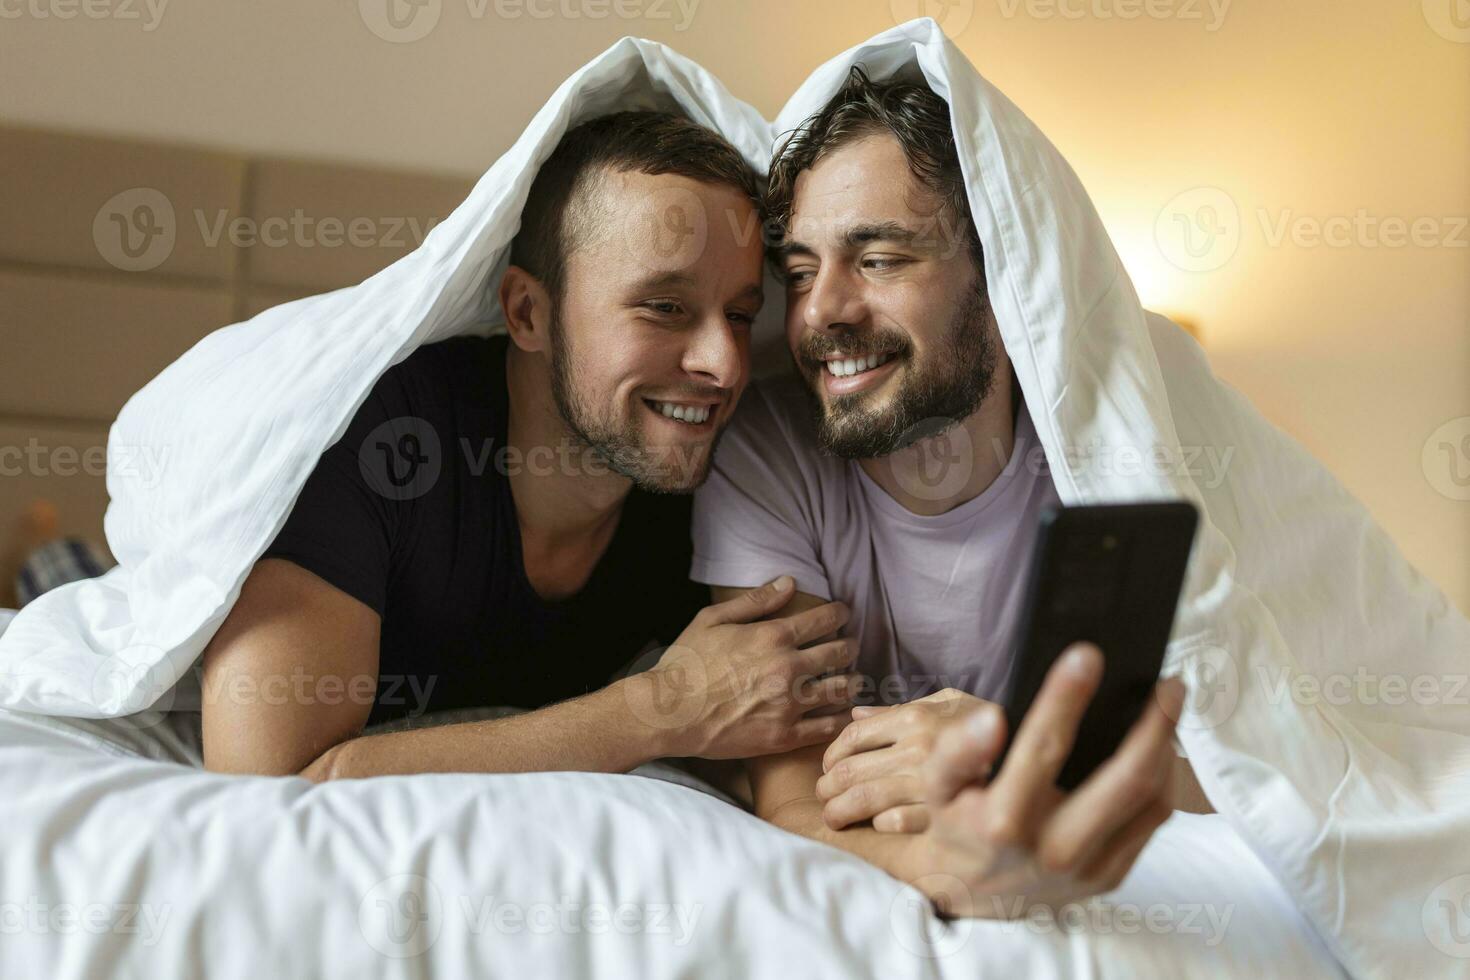 Happy gay couple having tender moments in bedroom - Homosexual love relationship and gender equality concept photo